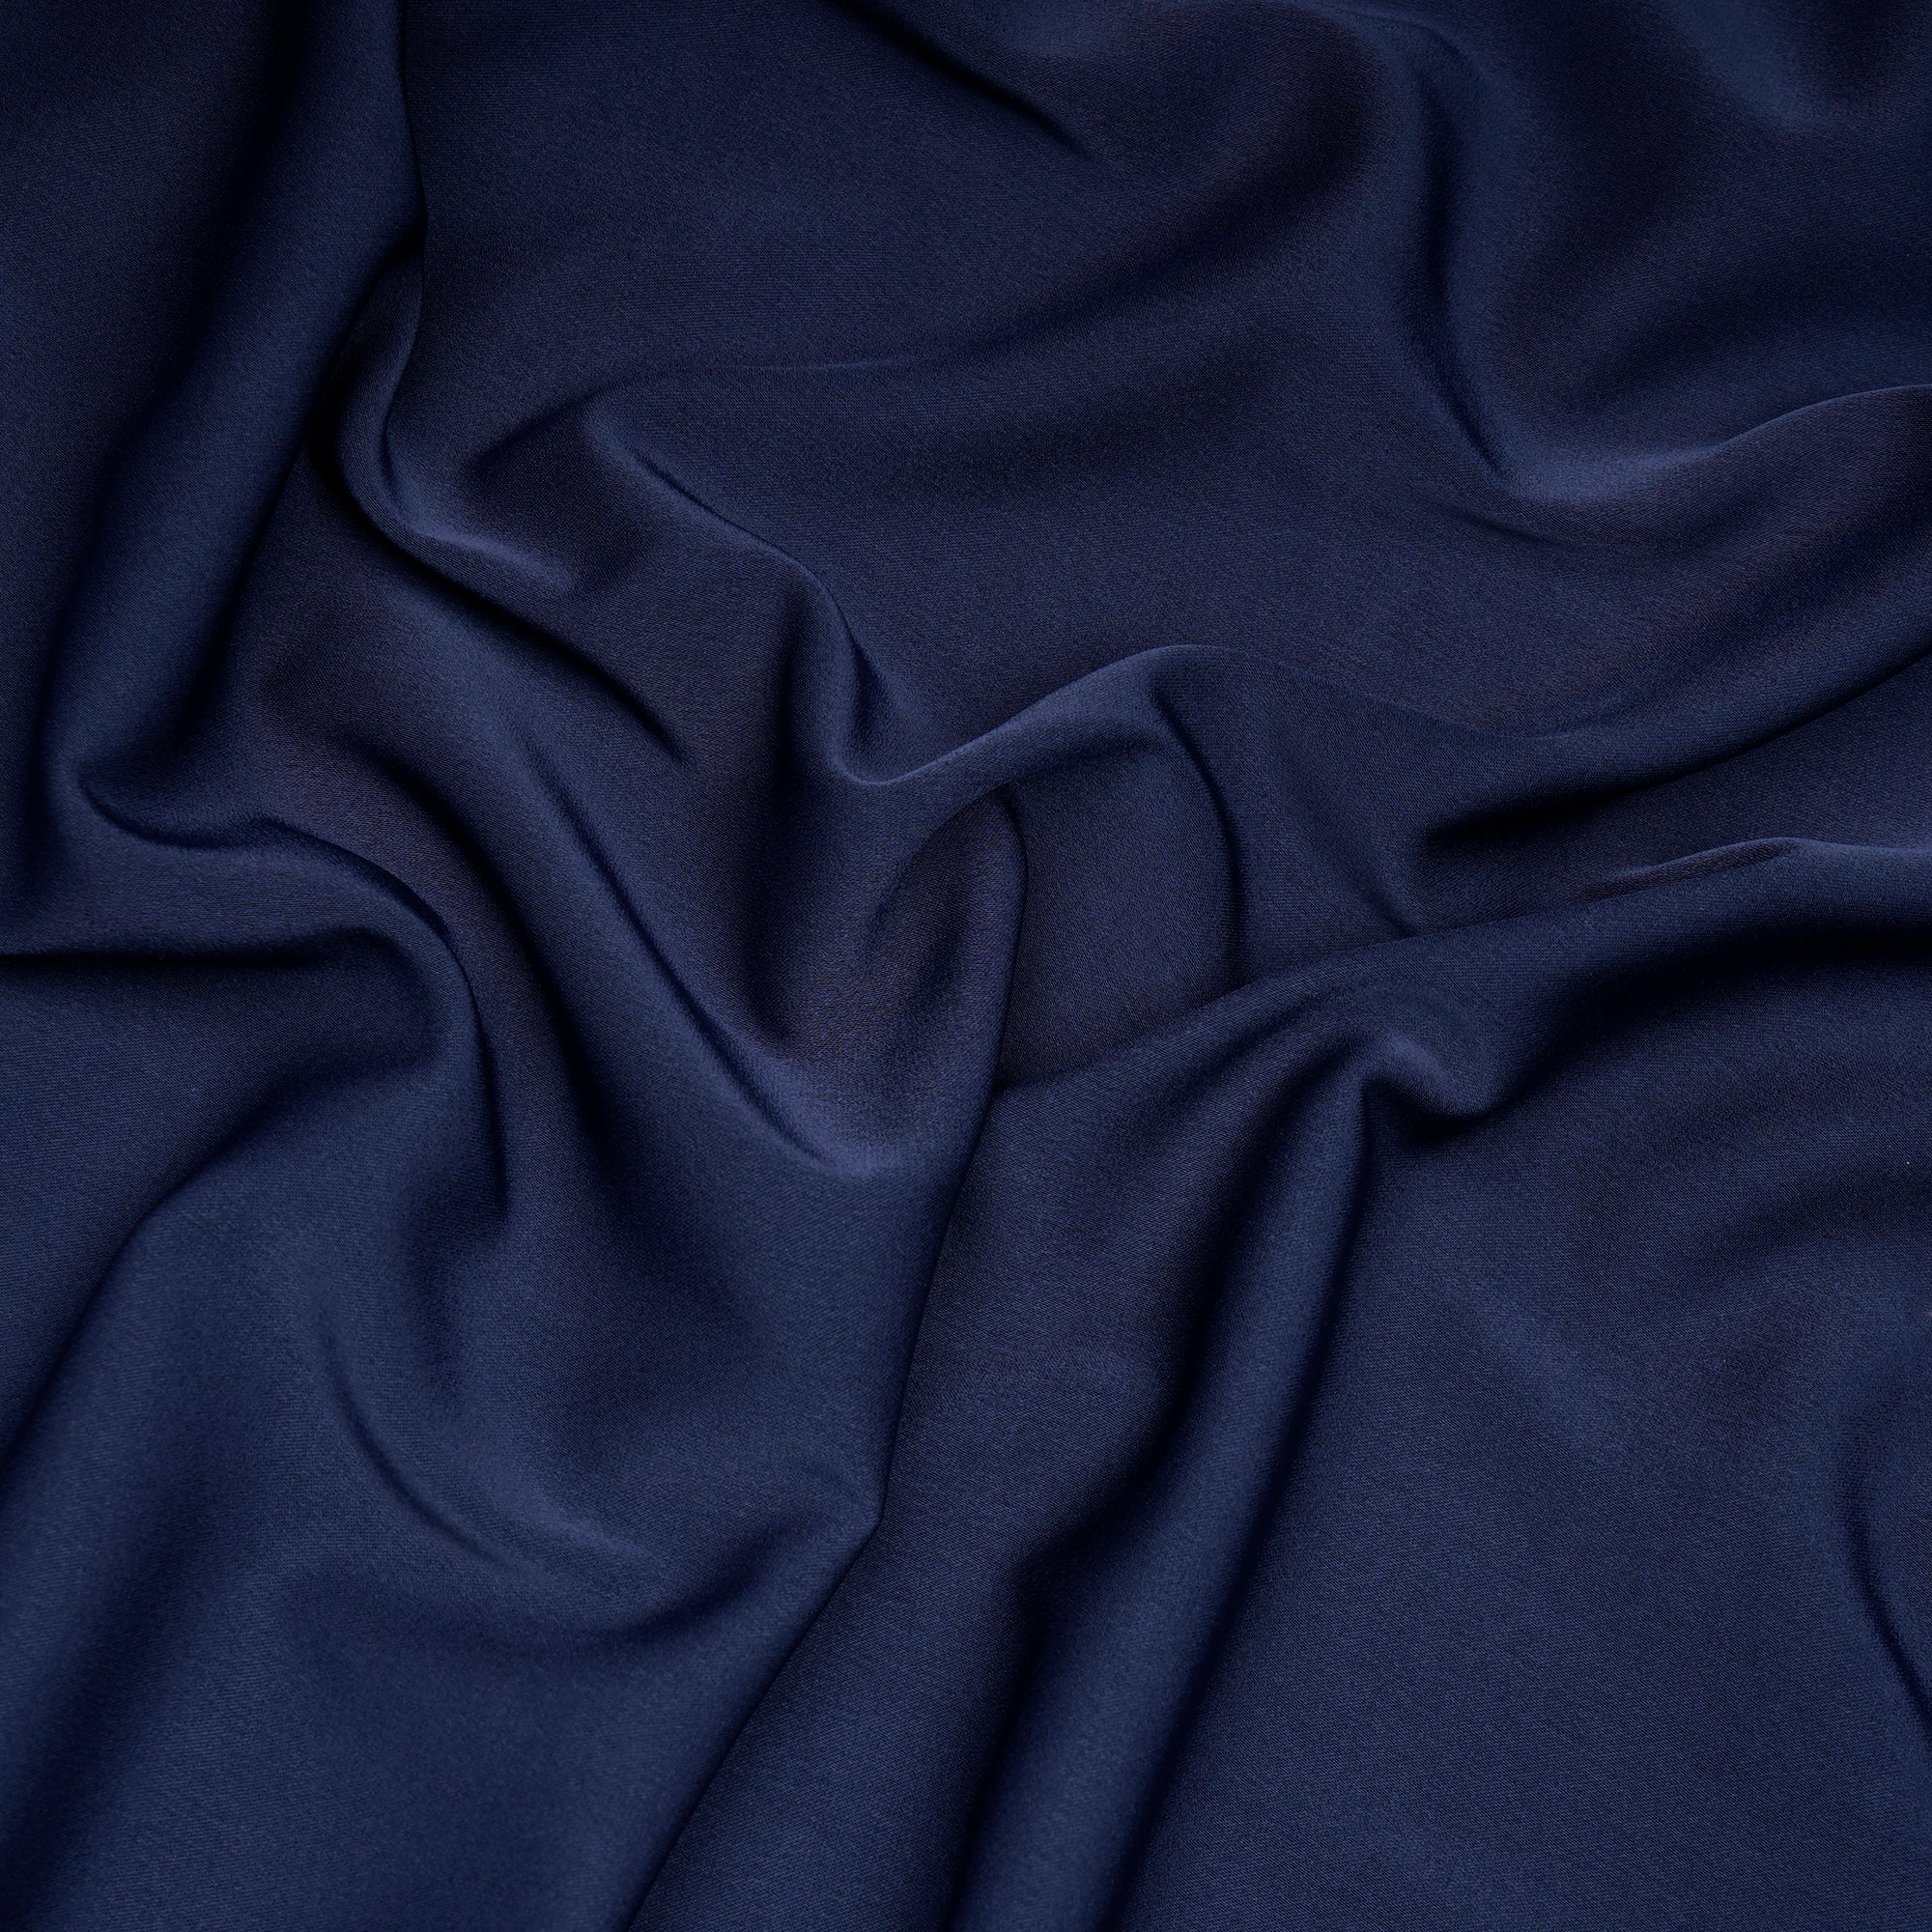 Deep Blue Solid Dyed Imported Prada Crepe Fabric (60" Width)